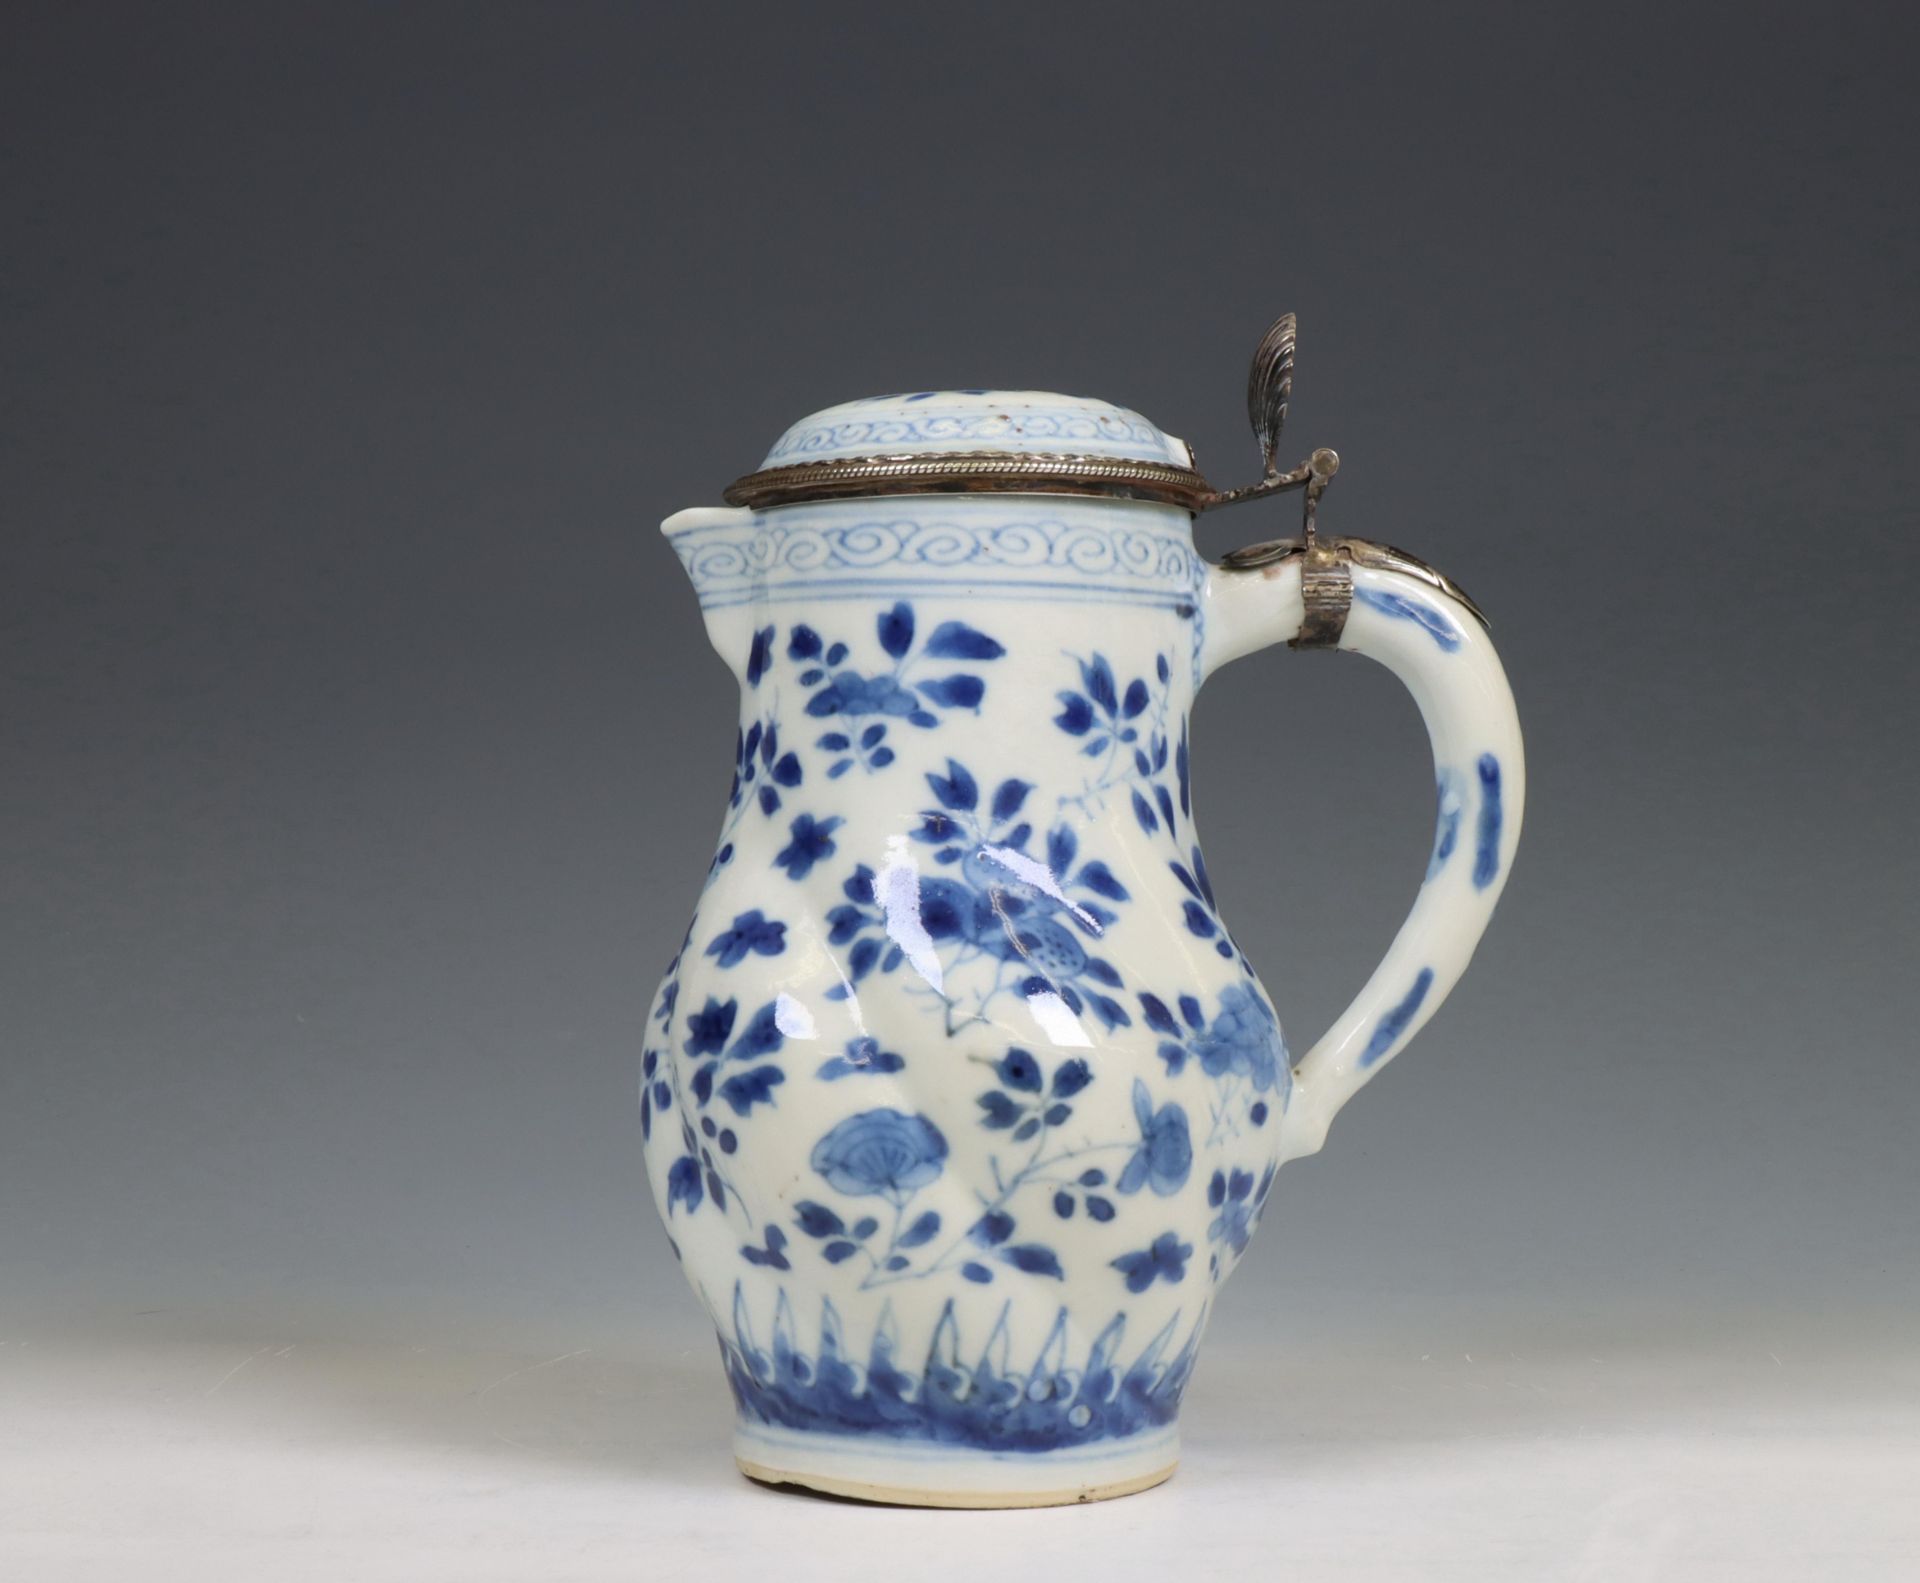 China, a blue and white porcelain gadrooned ewer and silver-mounted cover, Kangxi period (1662-1722)